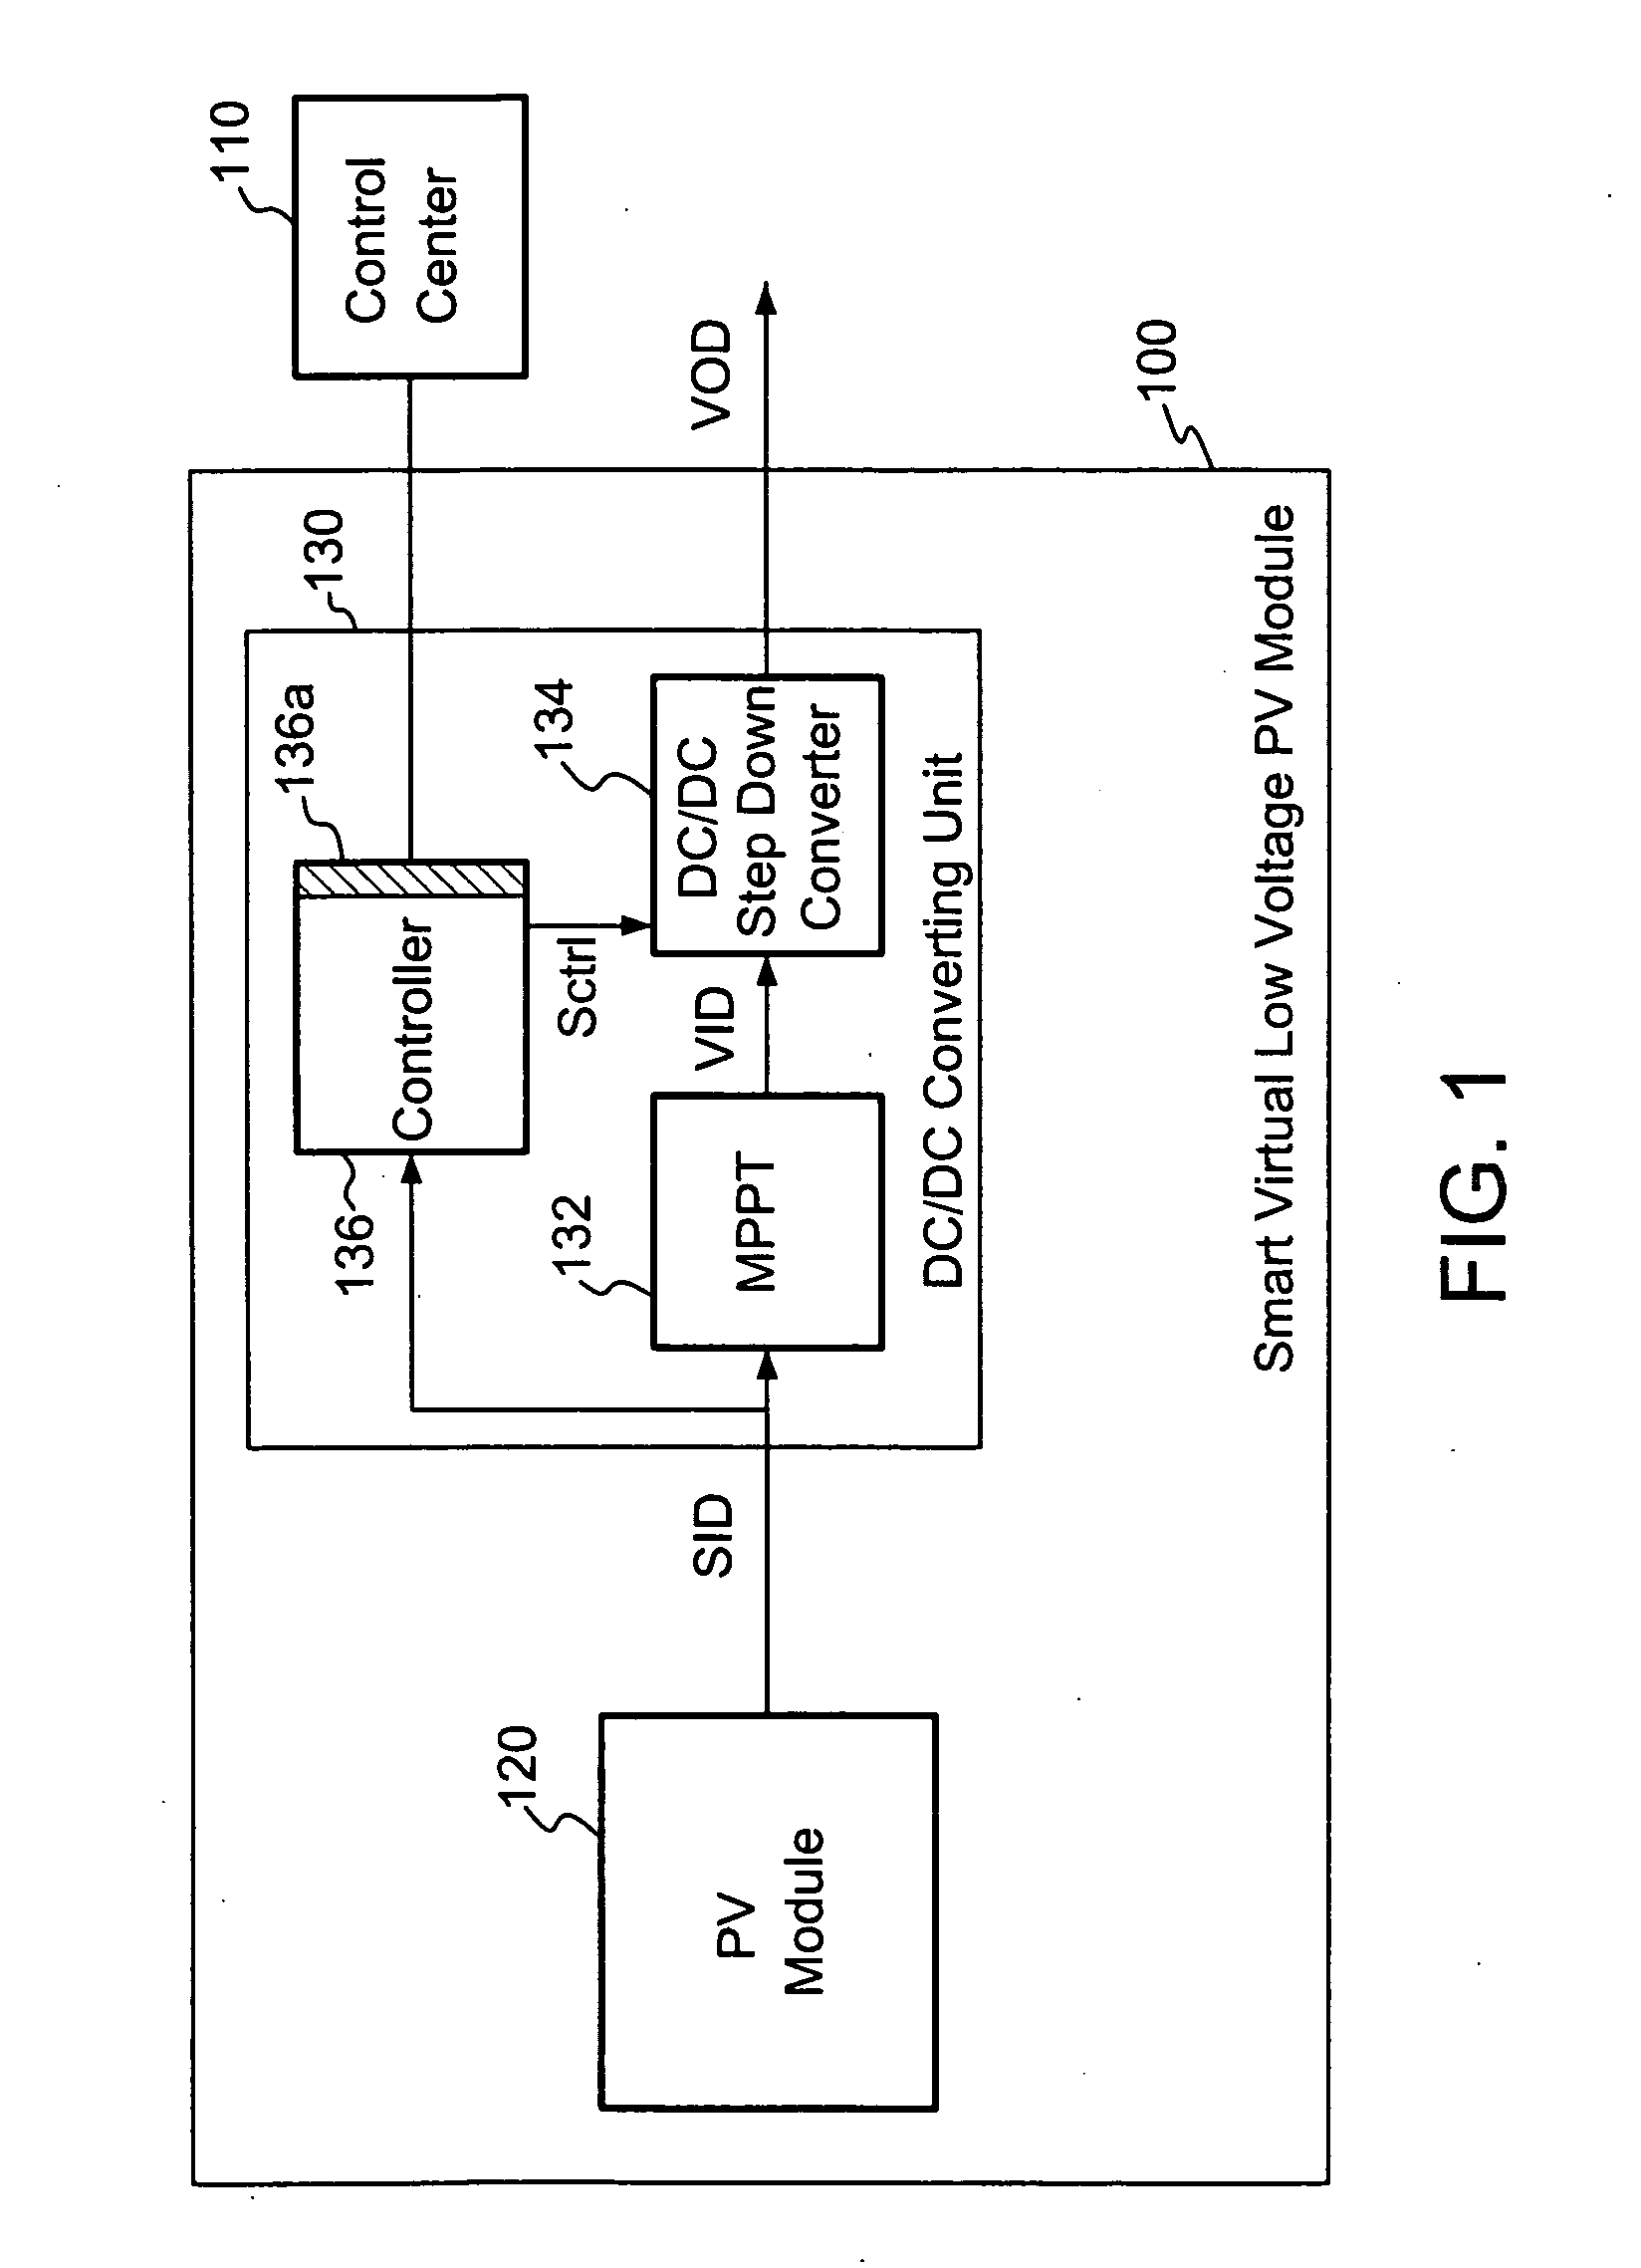 Smart virtual low voltage photovoltaic module and photovoltaic power system employing the same